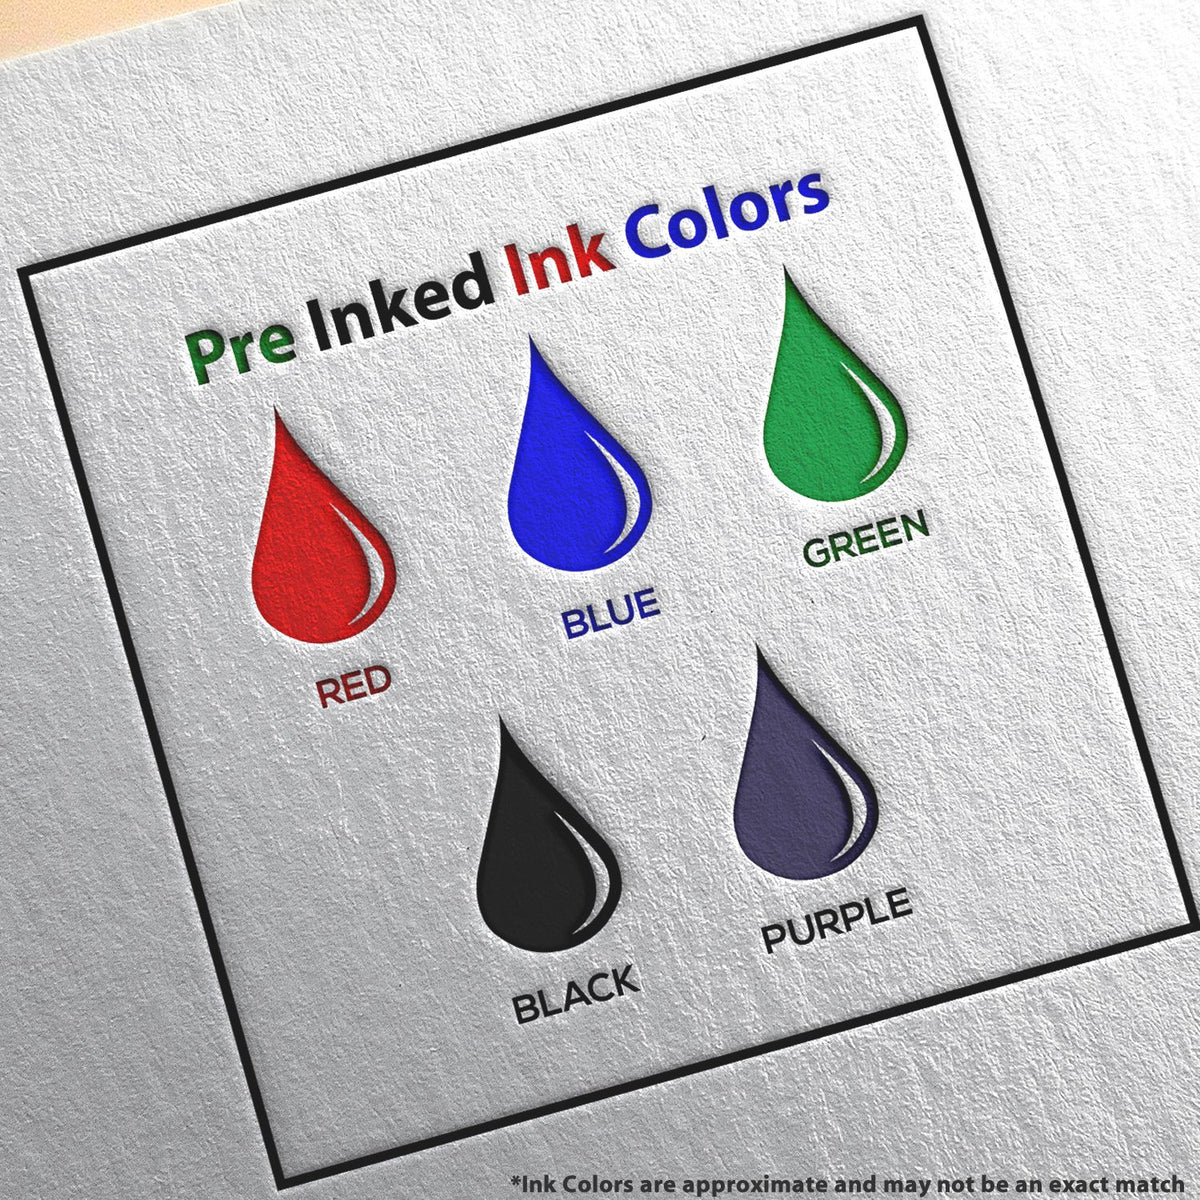 A picture showing the different ink colors or hues available for the Slim Pre-Inked Maryland Land Surveyor Seal Stamp product.